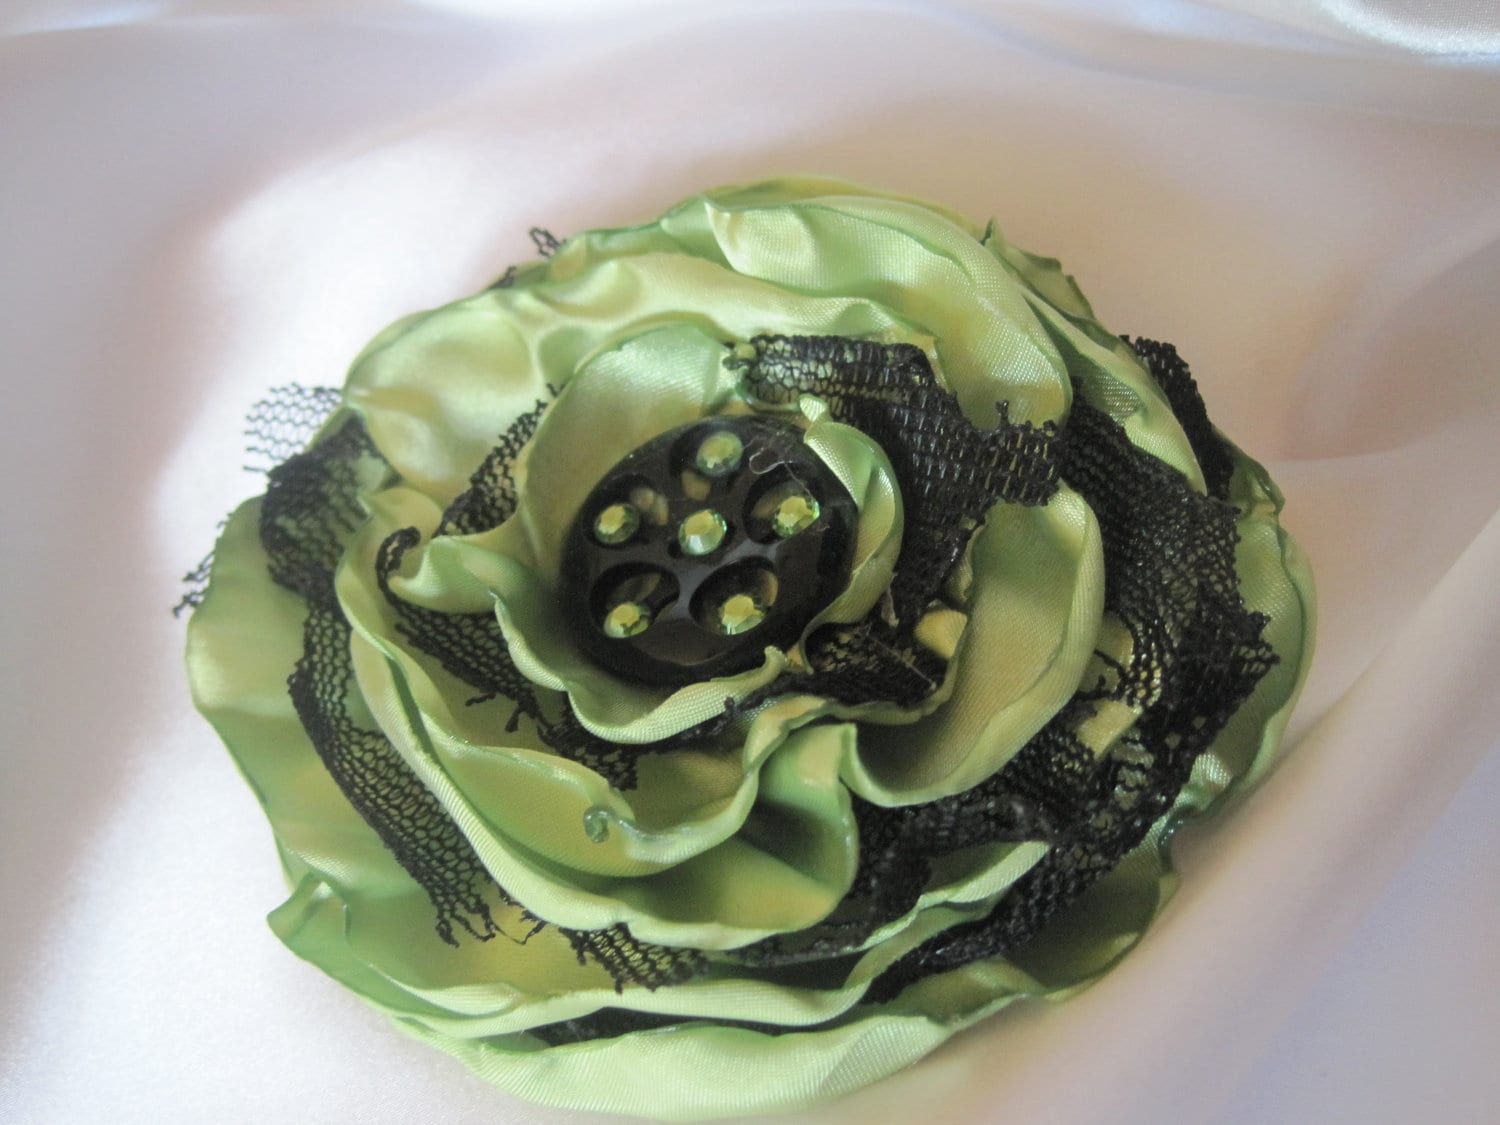 Sale.......Flower Pin Hair Clip in LIght Green Satin with Black Lace Accented with a Black Button and Swarovski Crystals - theraggedyrose